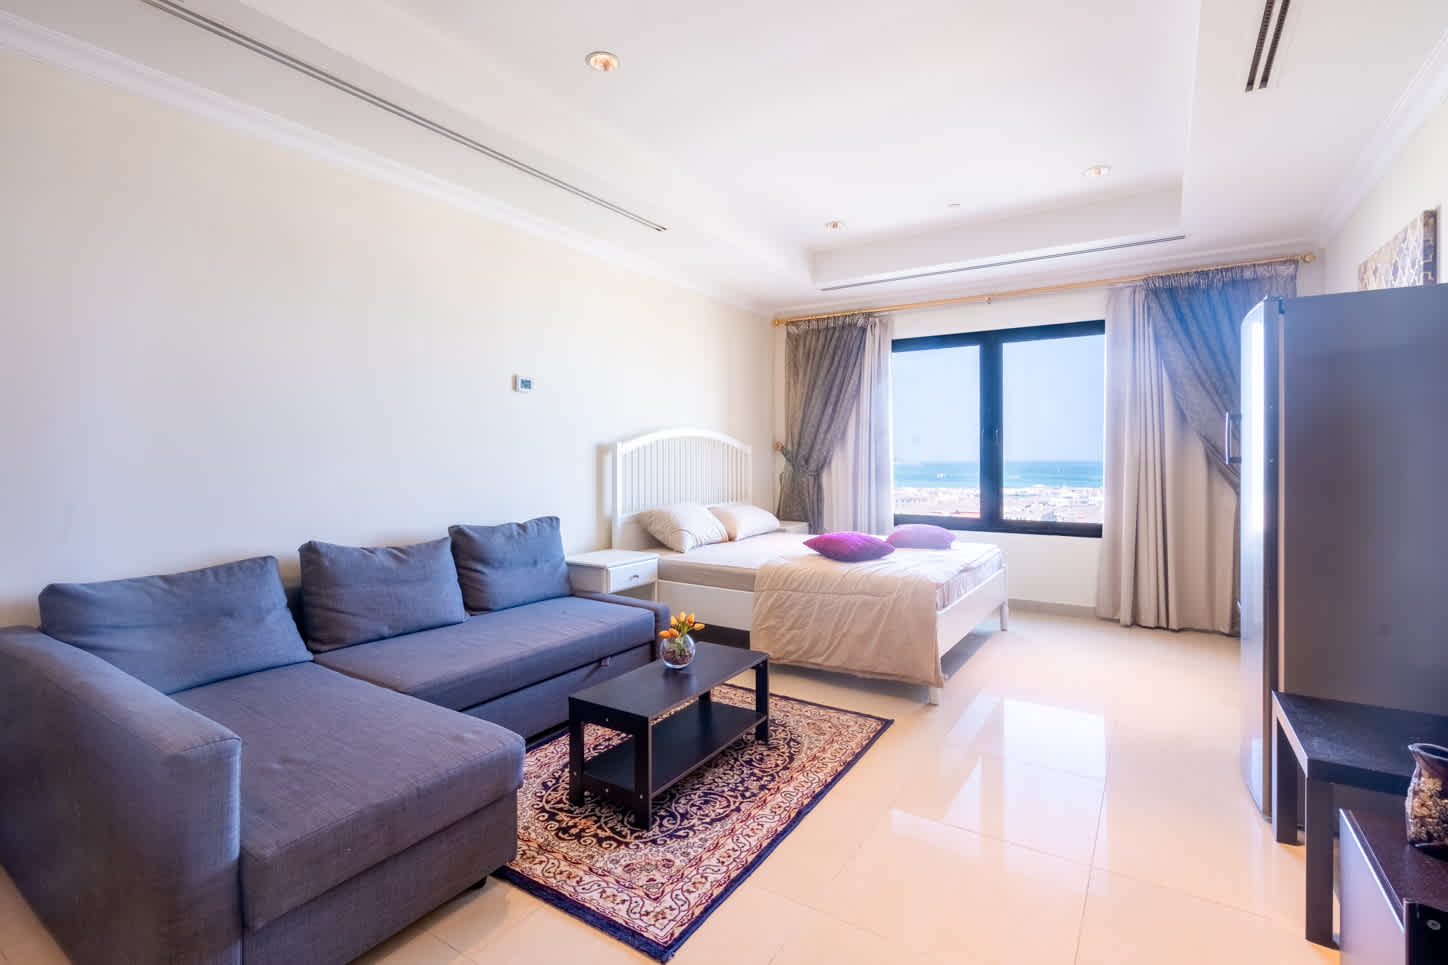 25 Spaces Real Estate - Porto Arabia - Properties for Rent - 16 March 2023 refWAPT258066 (5)